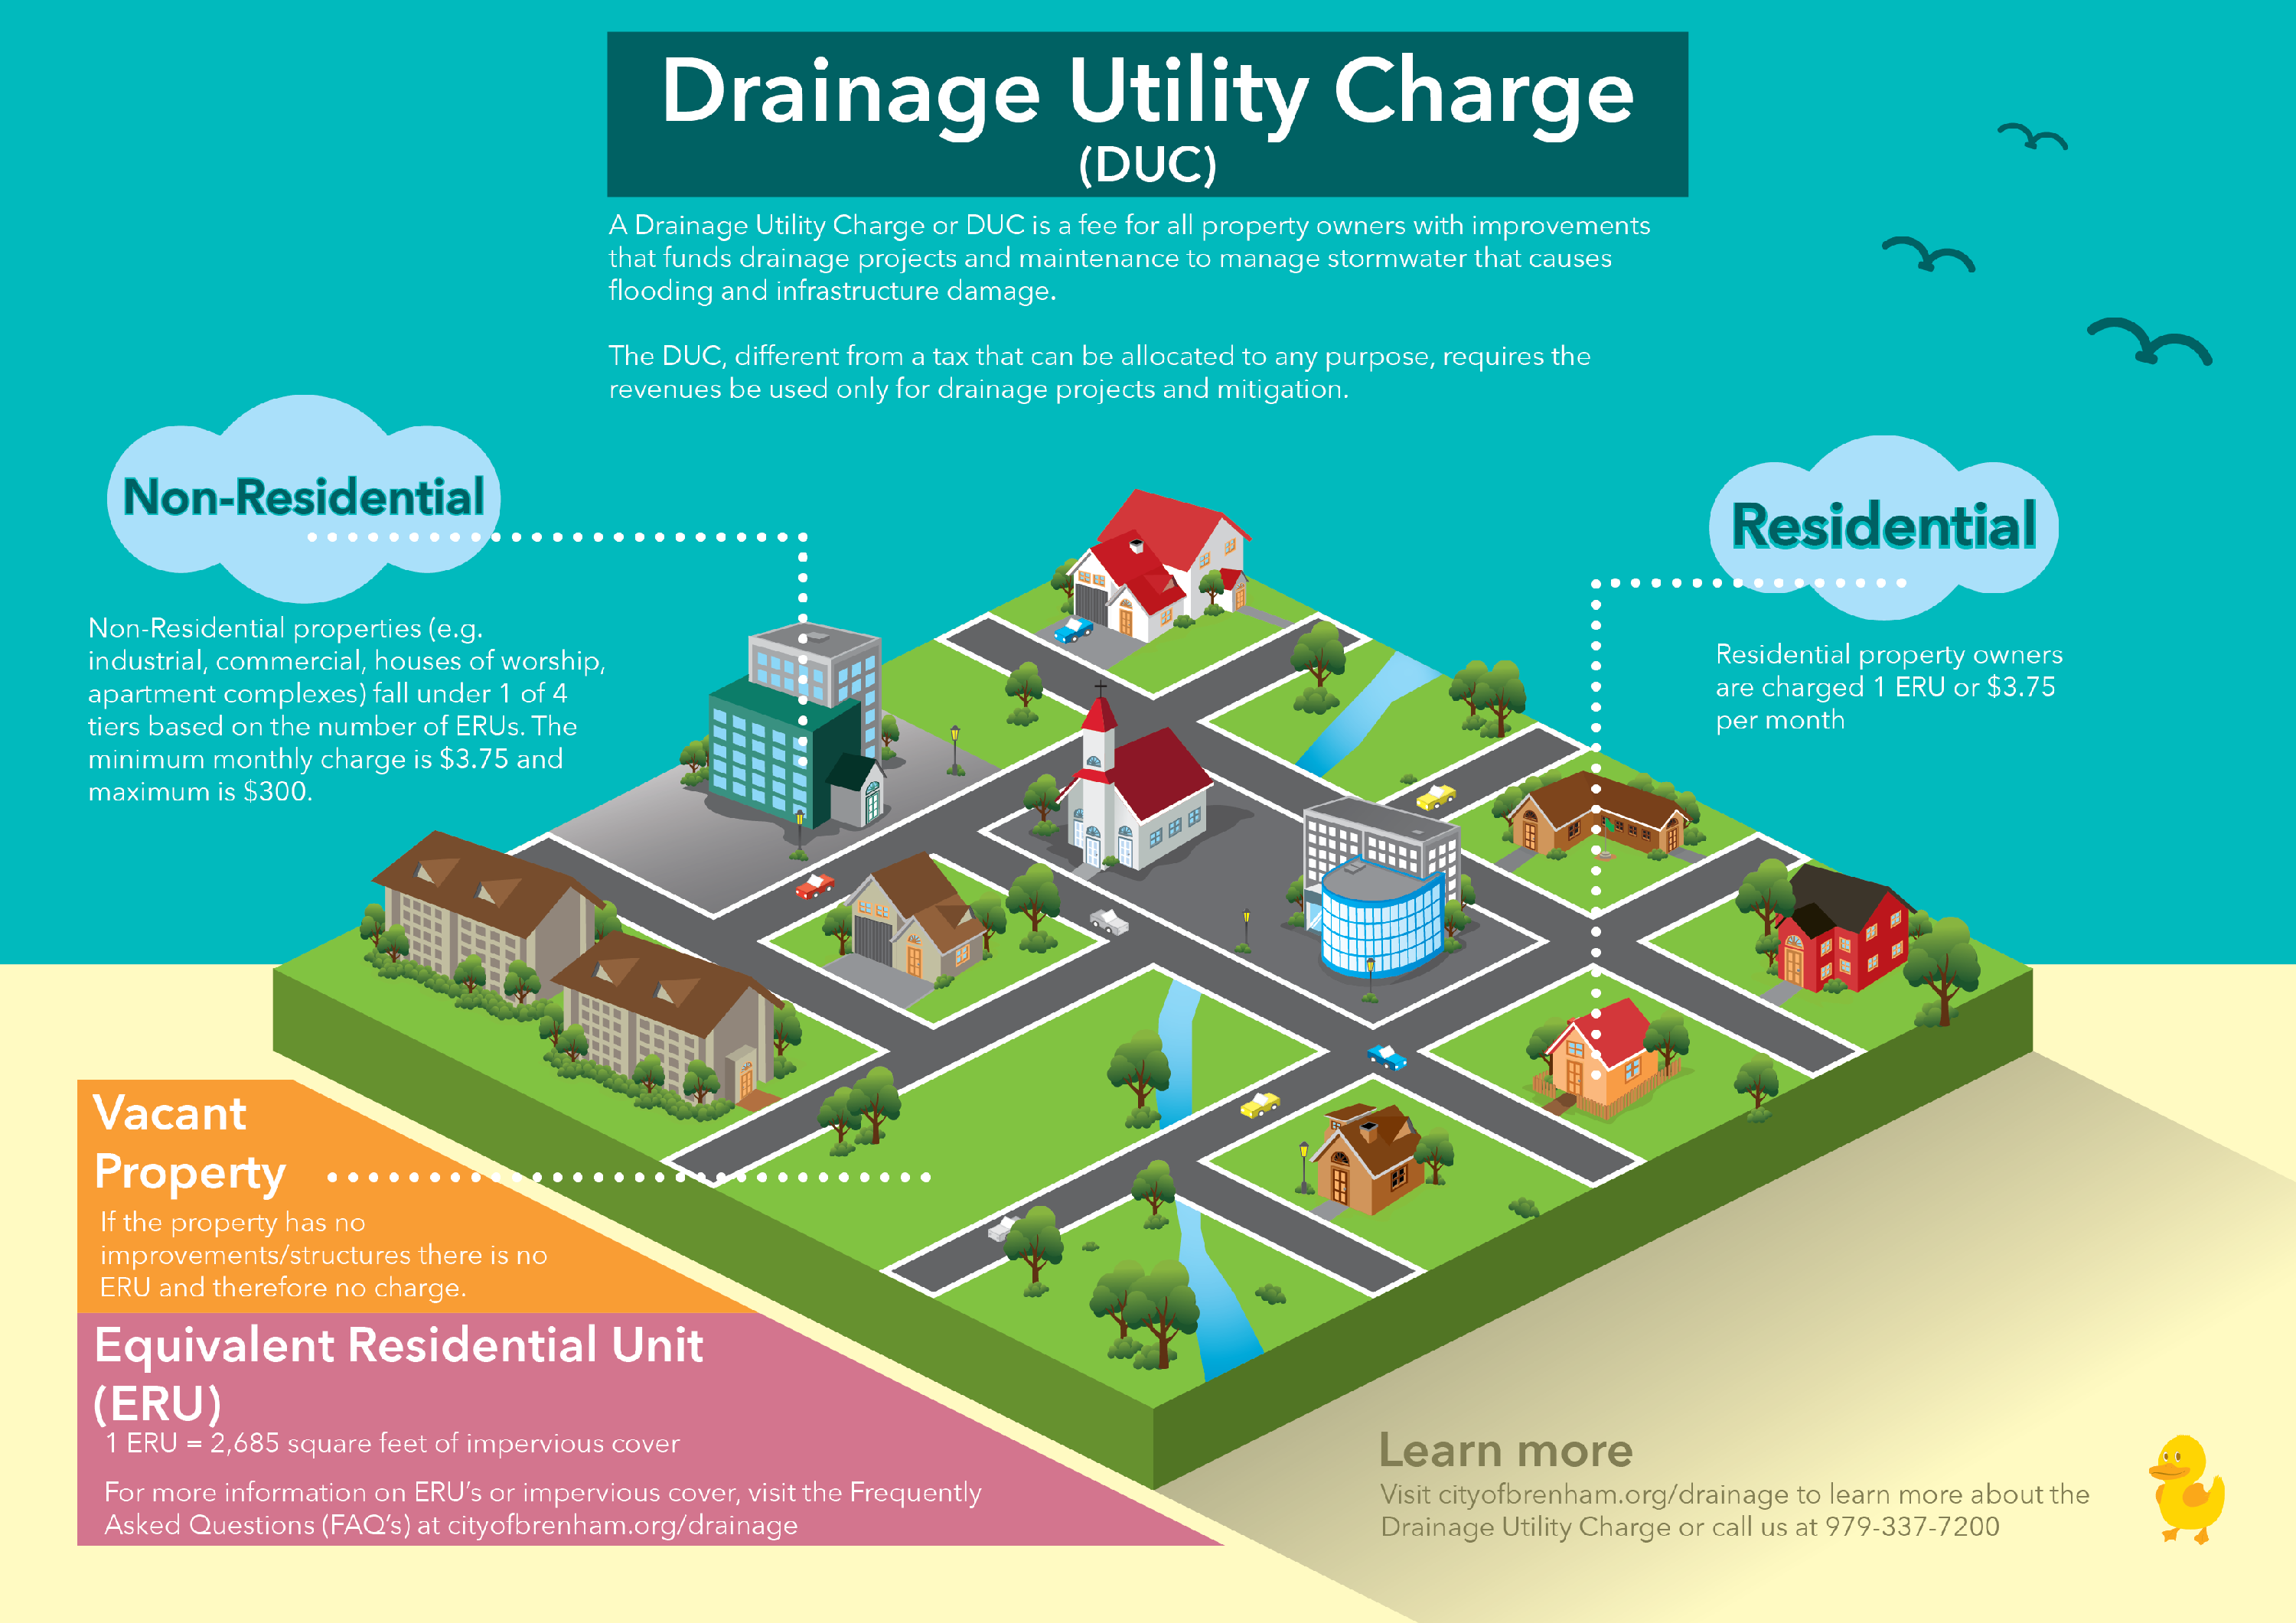 buildings-infographic-drainage-fee This graphic contains text that is included in the FAQ's on the cityofbrenham.org/drainage page. It quickly explains the charge, who pays for it, and directs viewers to the drainage page for more information.